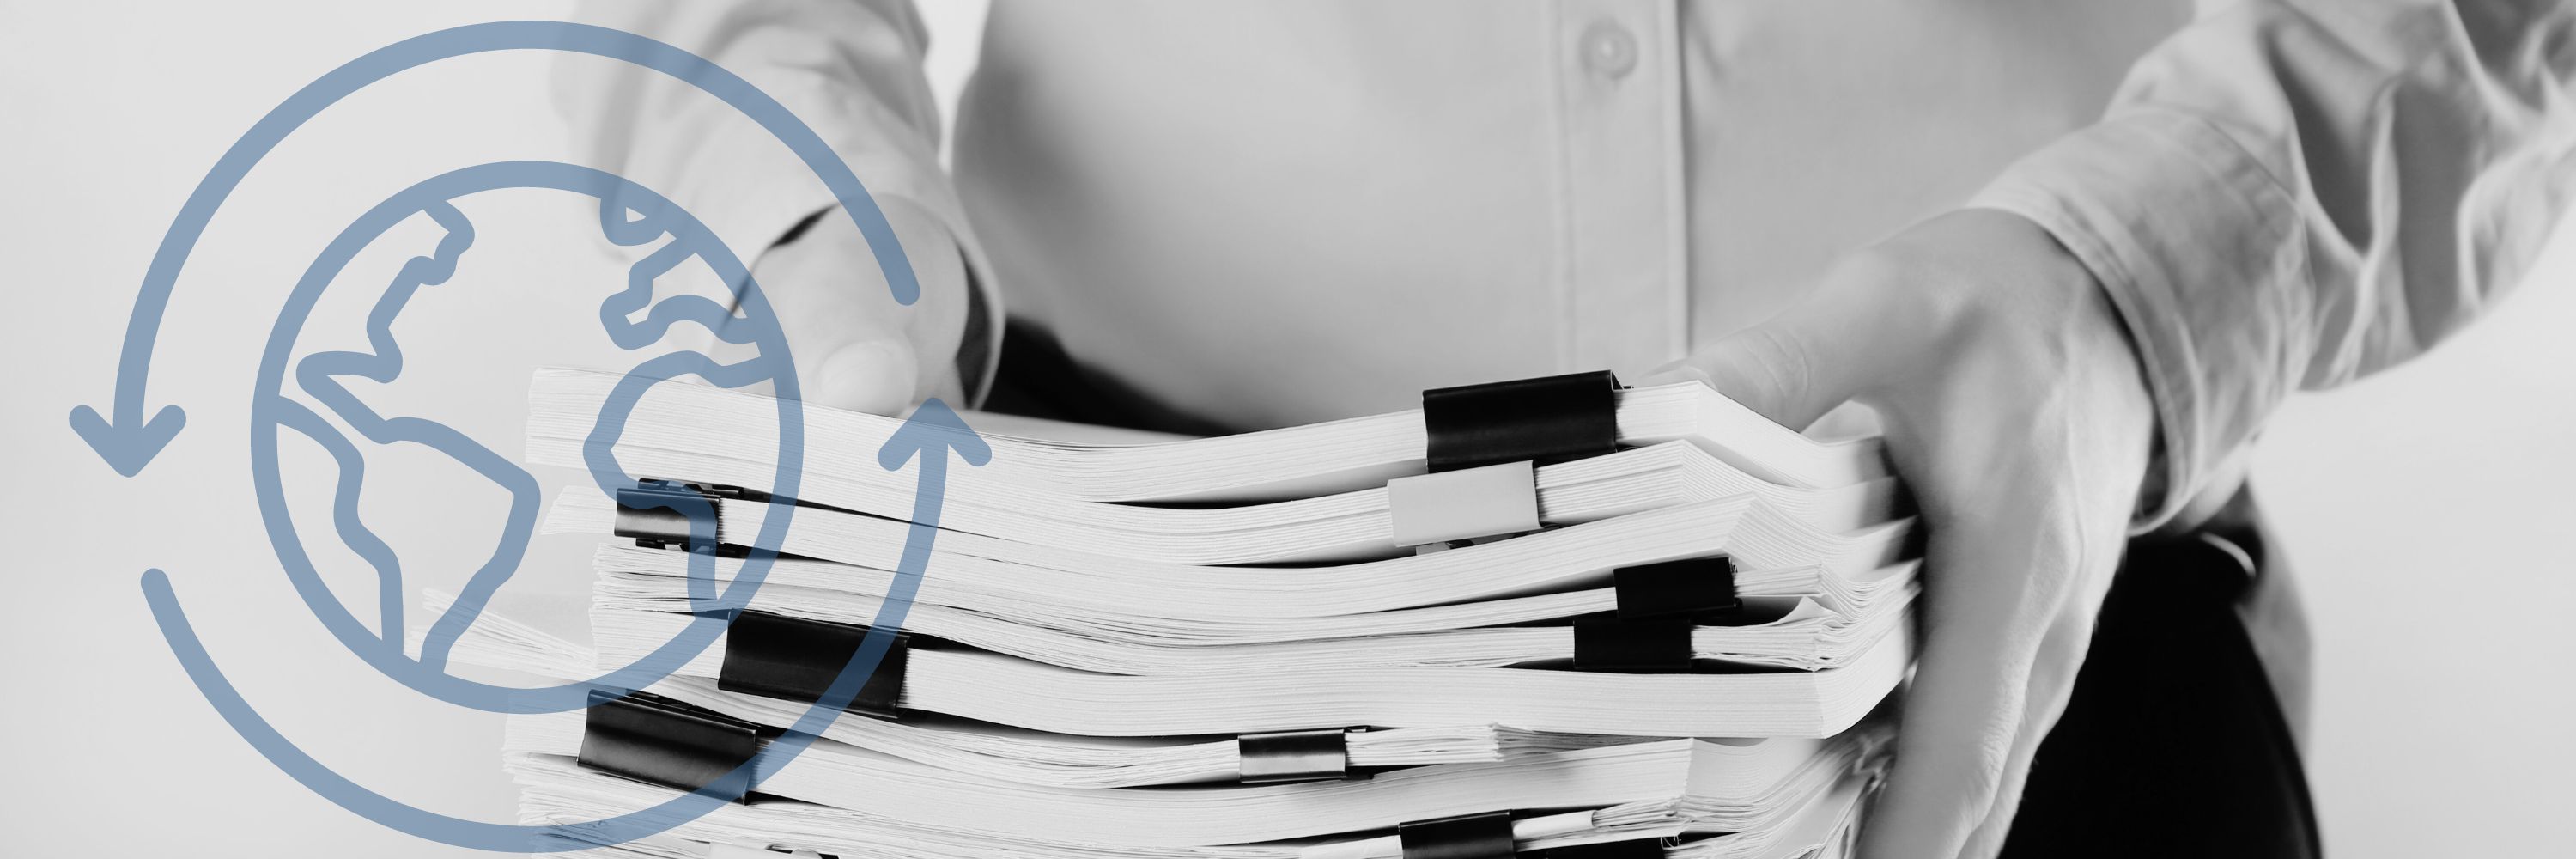 A man holds a stack of papers and there is a graphic overlay of sustainability